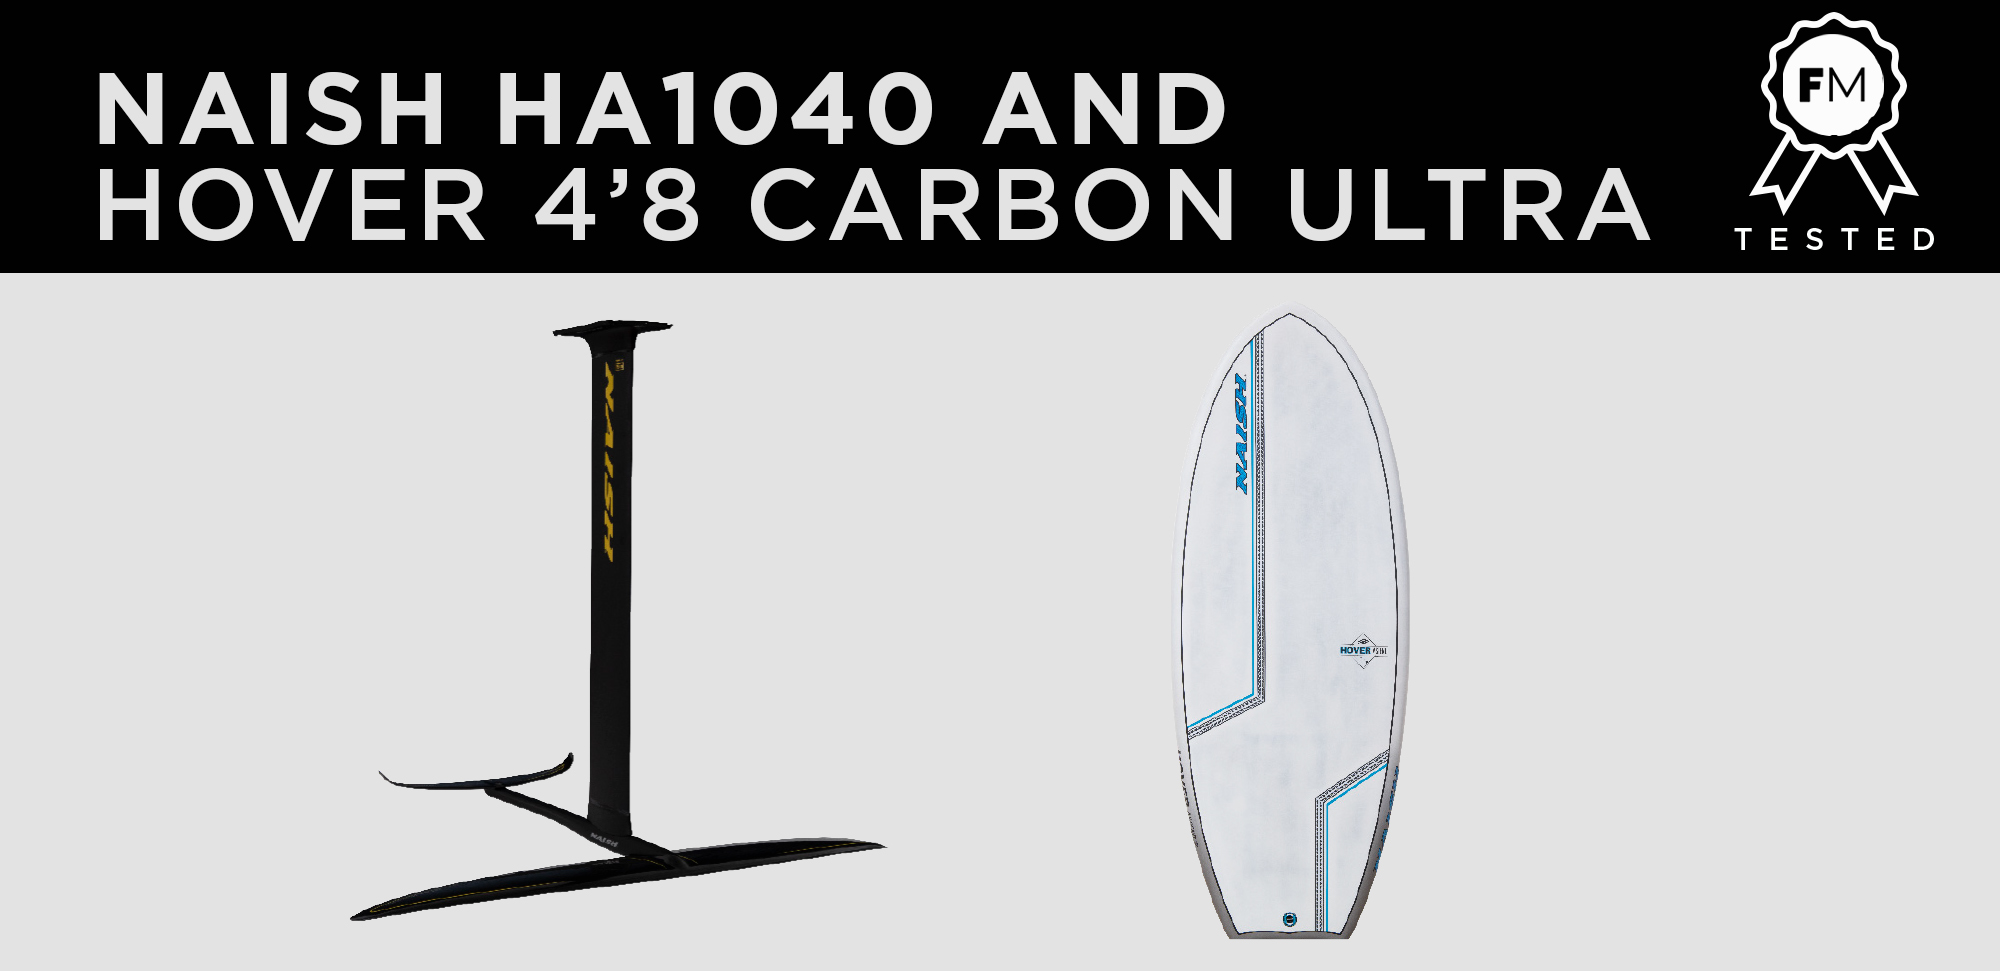 Naish HA1040 and Hover 4'8 Carbon Ultra Review - Foiling Magazine 